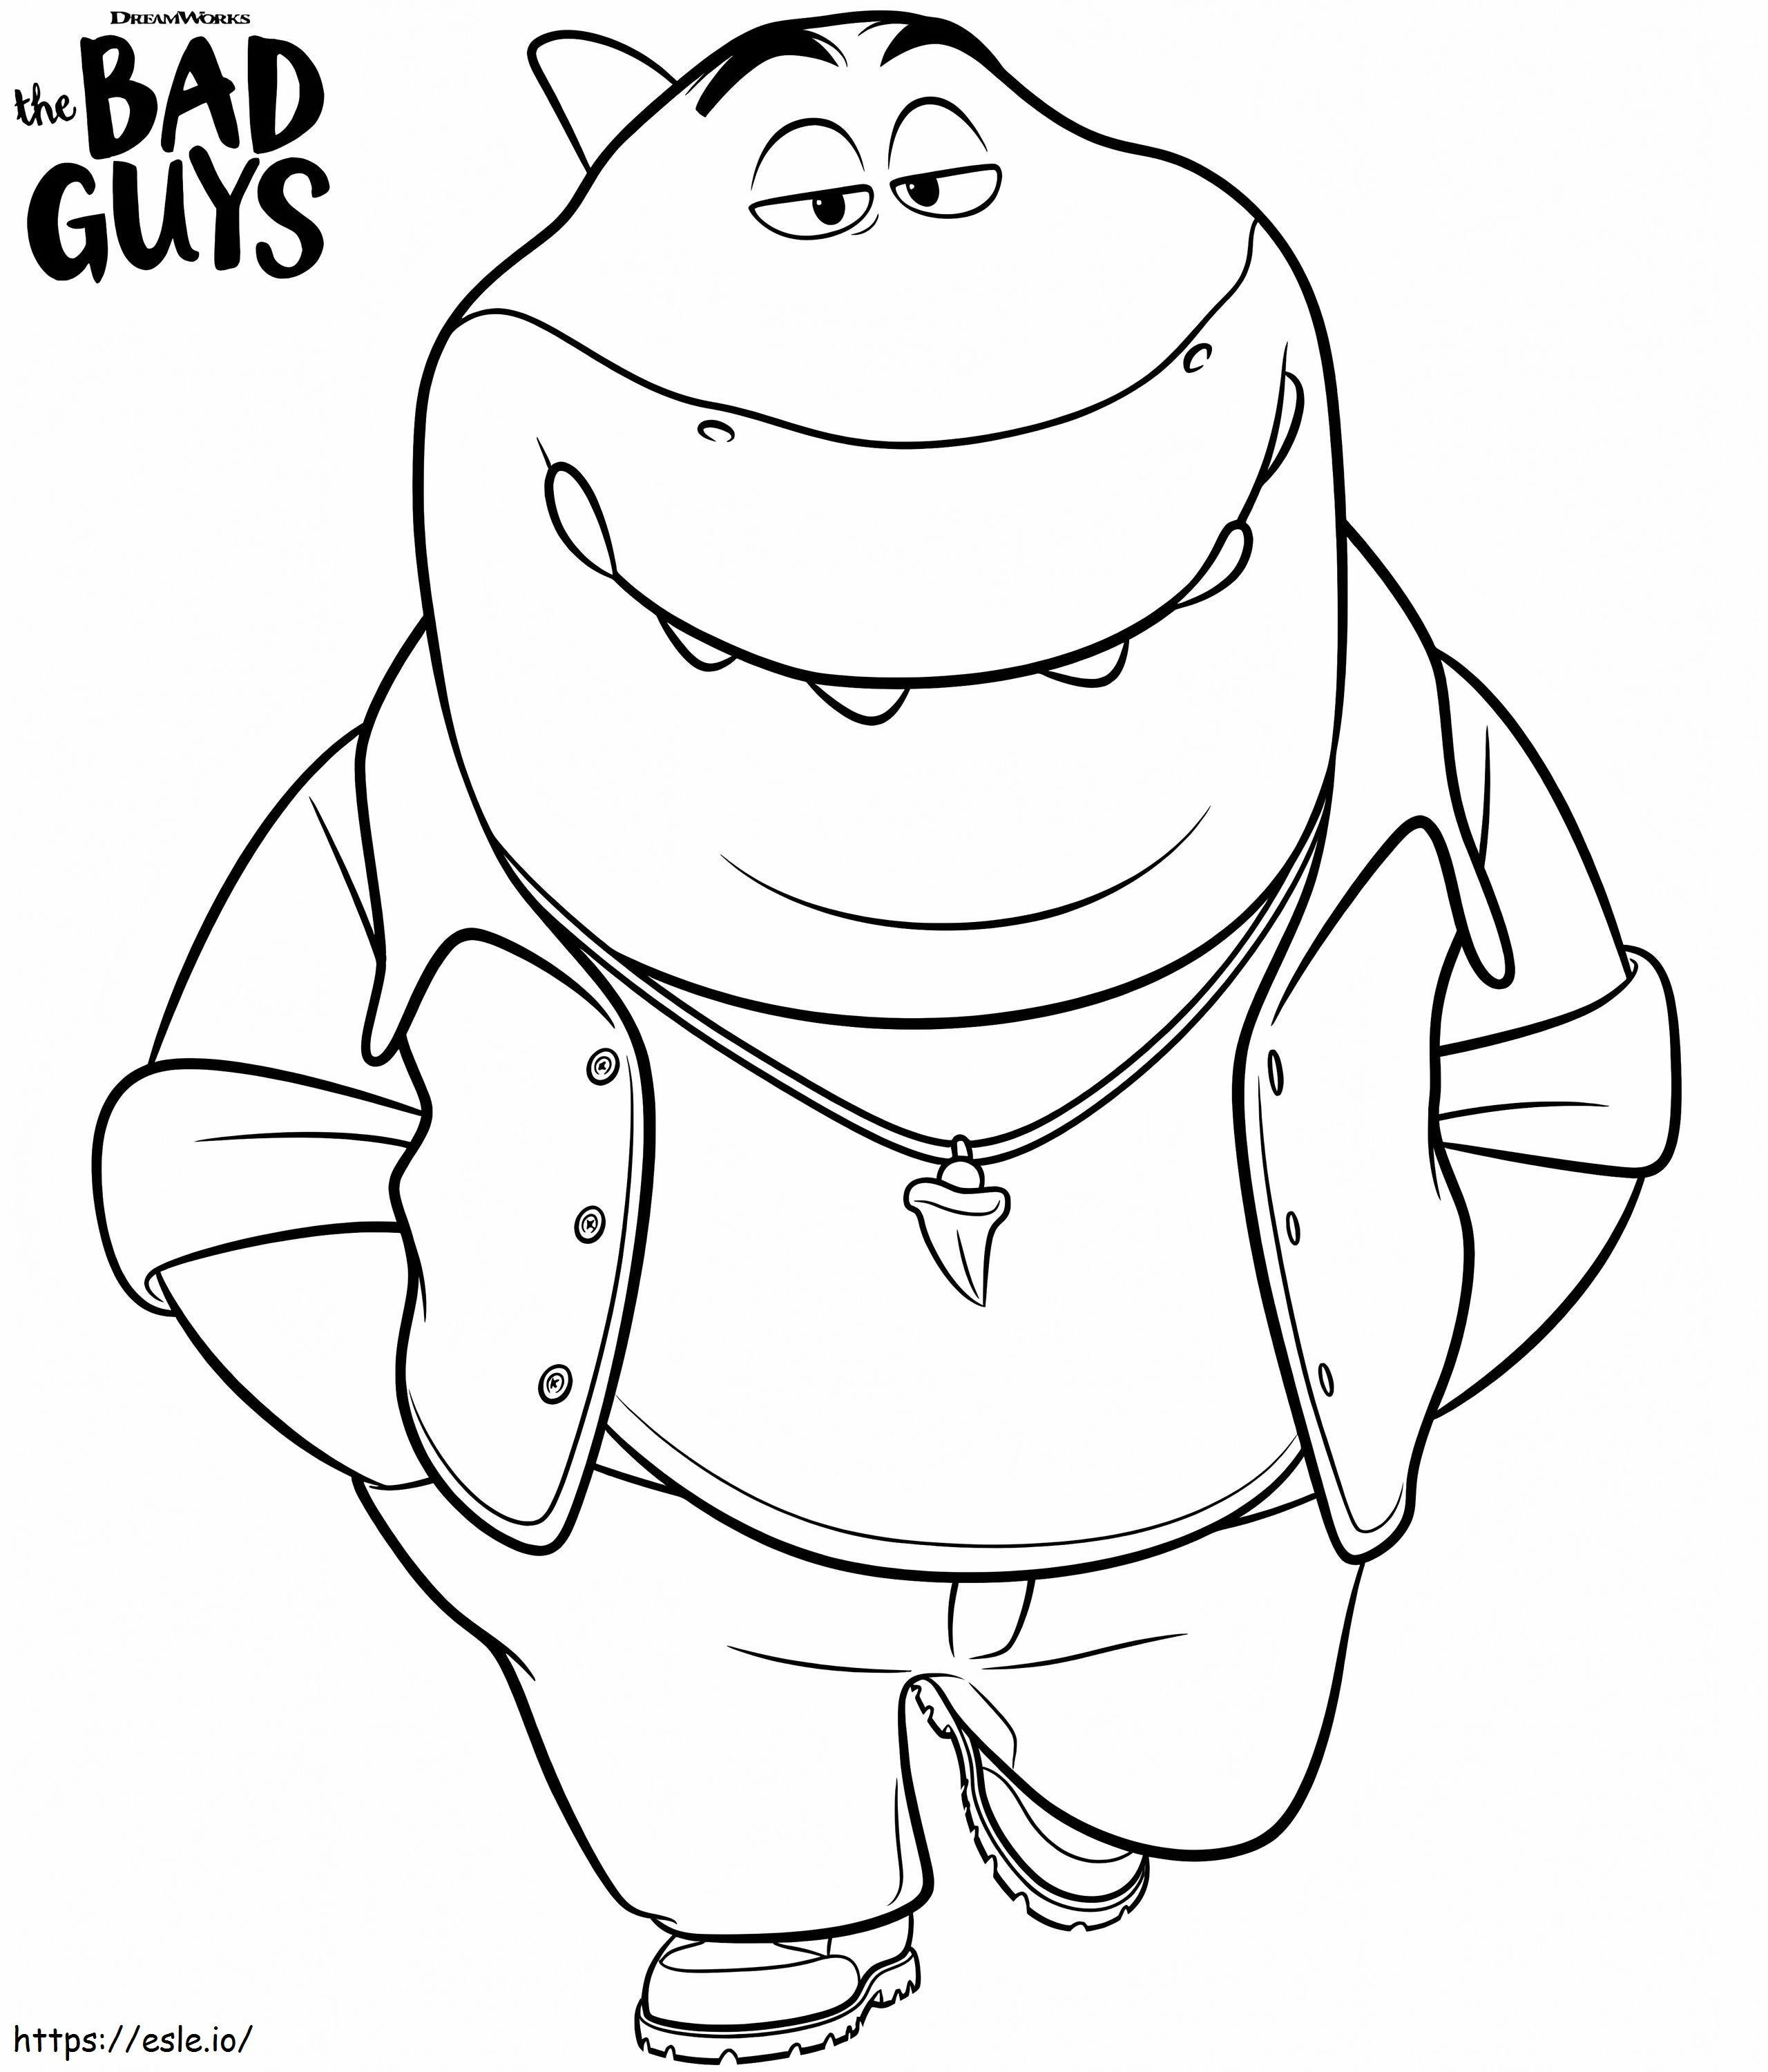 Mr. Shark From The Bad Guys coloring page